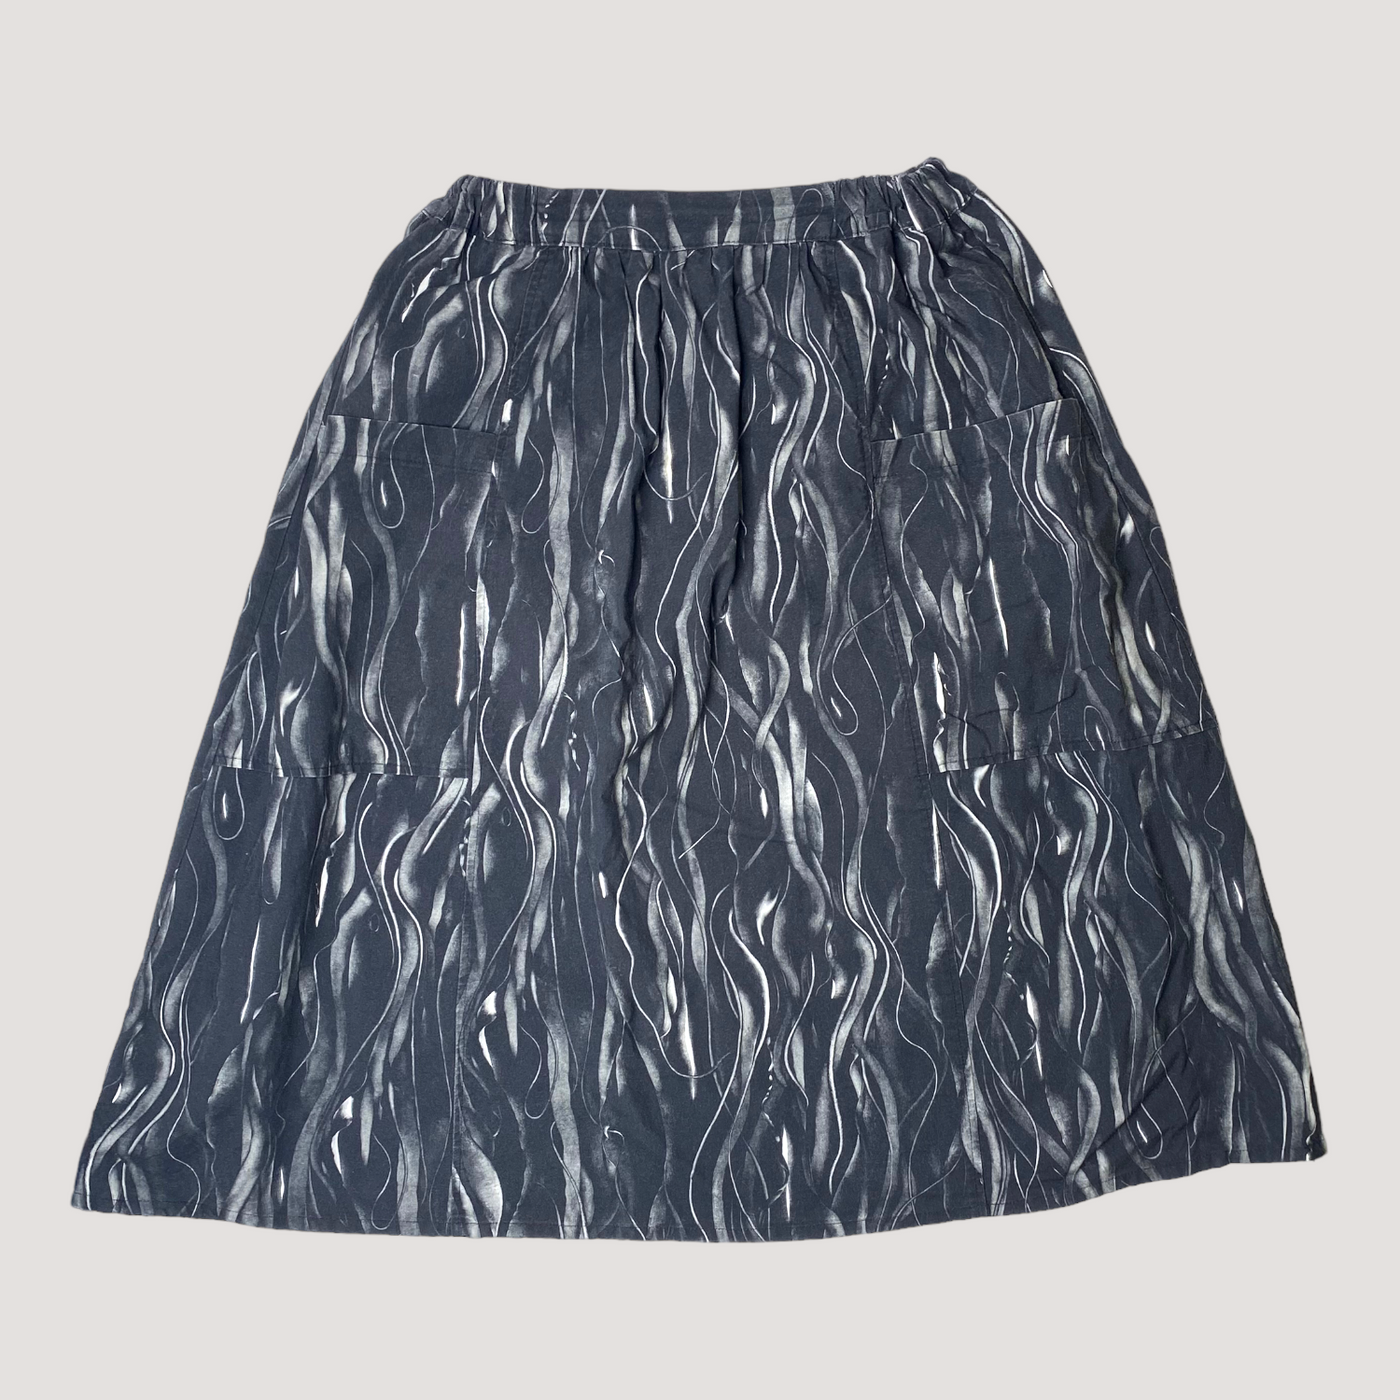 Vimma woven skirt, black and white | woman one size